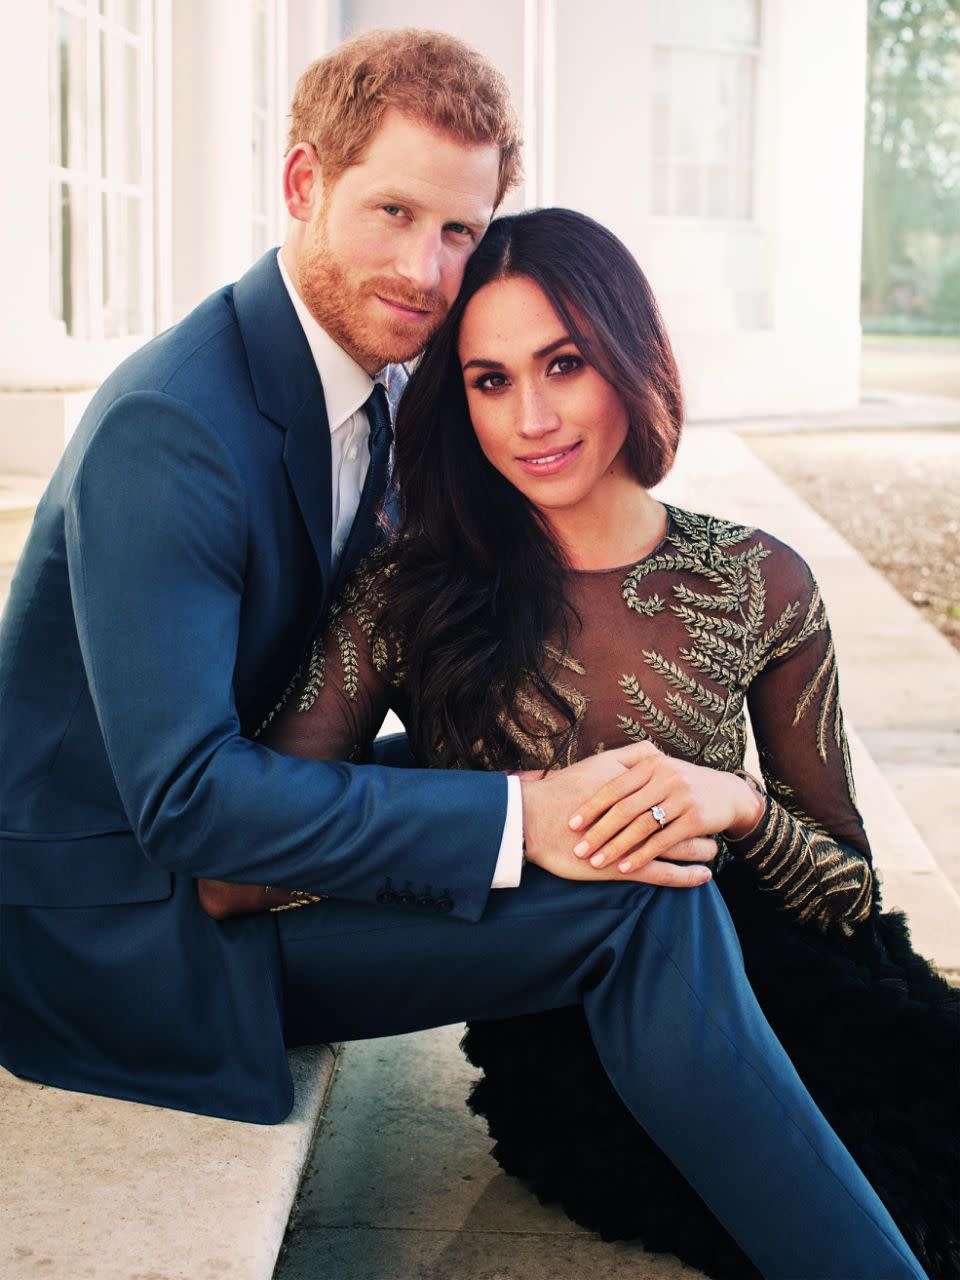 Meghan still has to be baptised and confirmed before she can marry Prince Harry. Photo: Getty Images